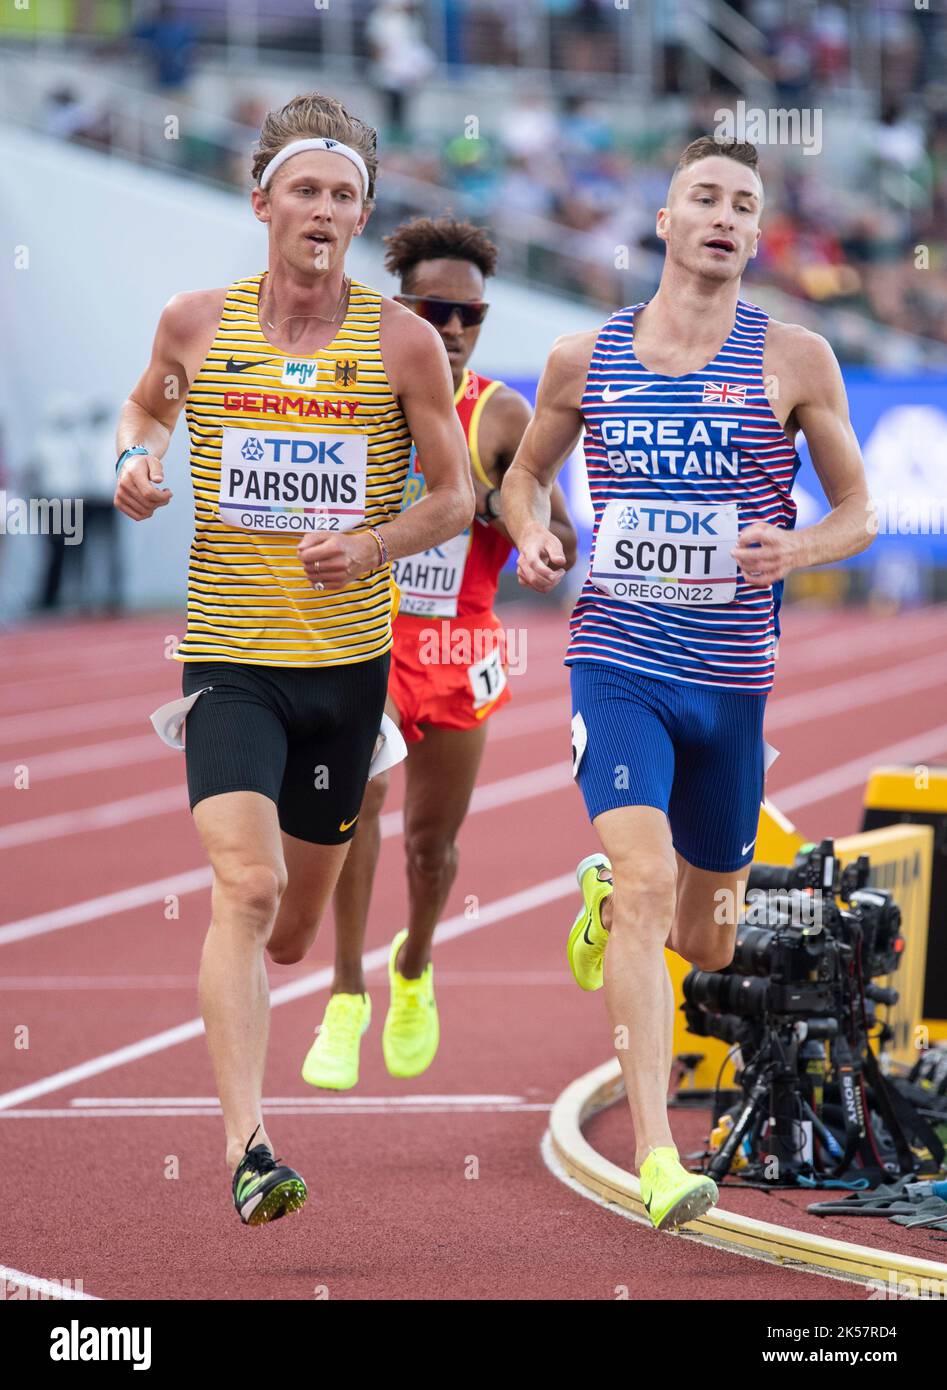 Sam Parsons and Marc Scott competing in the men’s 5000m heats at the World Athletics Championships, Hayward Field, Eugene, Oregon USA on the 21st July Stock Photo